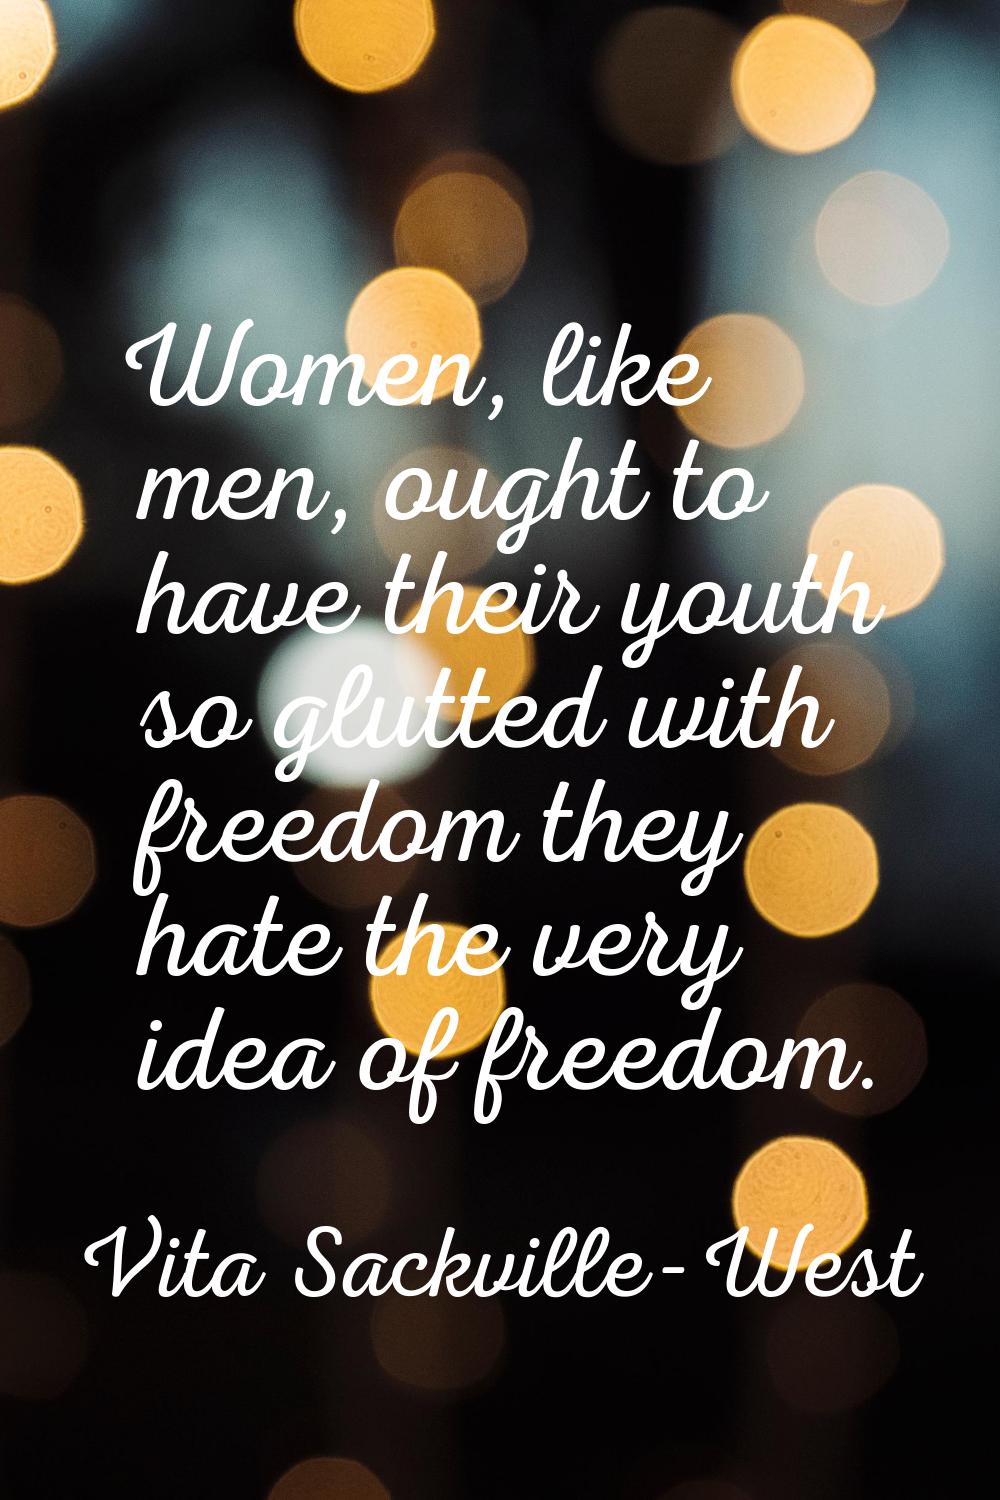 Women, like men, ought to have their youth so glutted with freedom they hate the very idea of freed